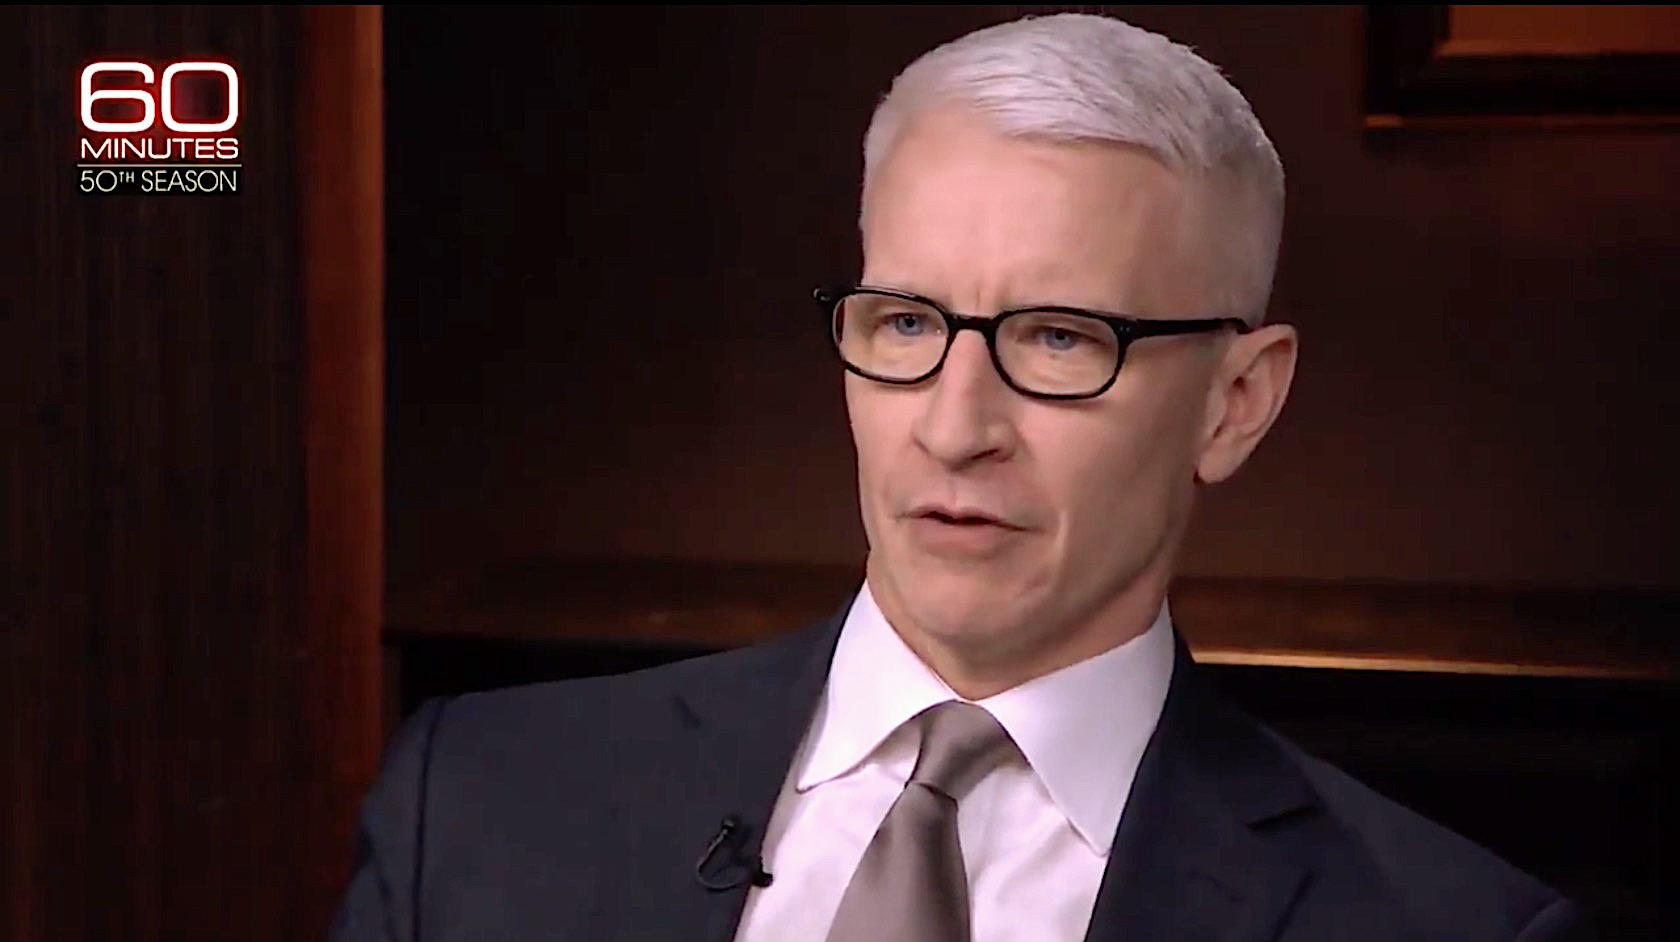 Anderson Cooper talks about Stormy Daniels and 60 Minutes